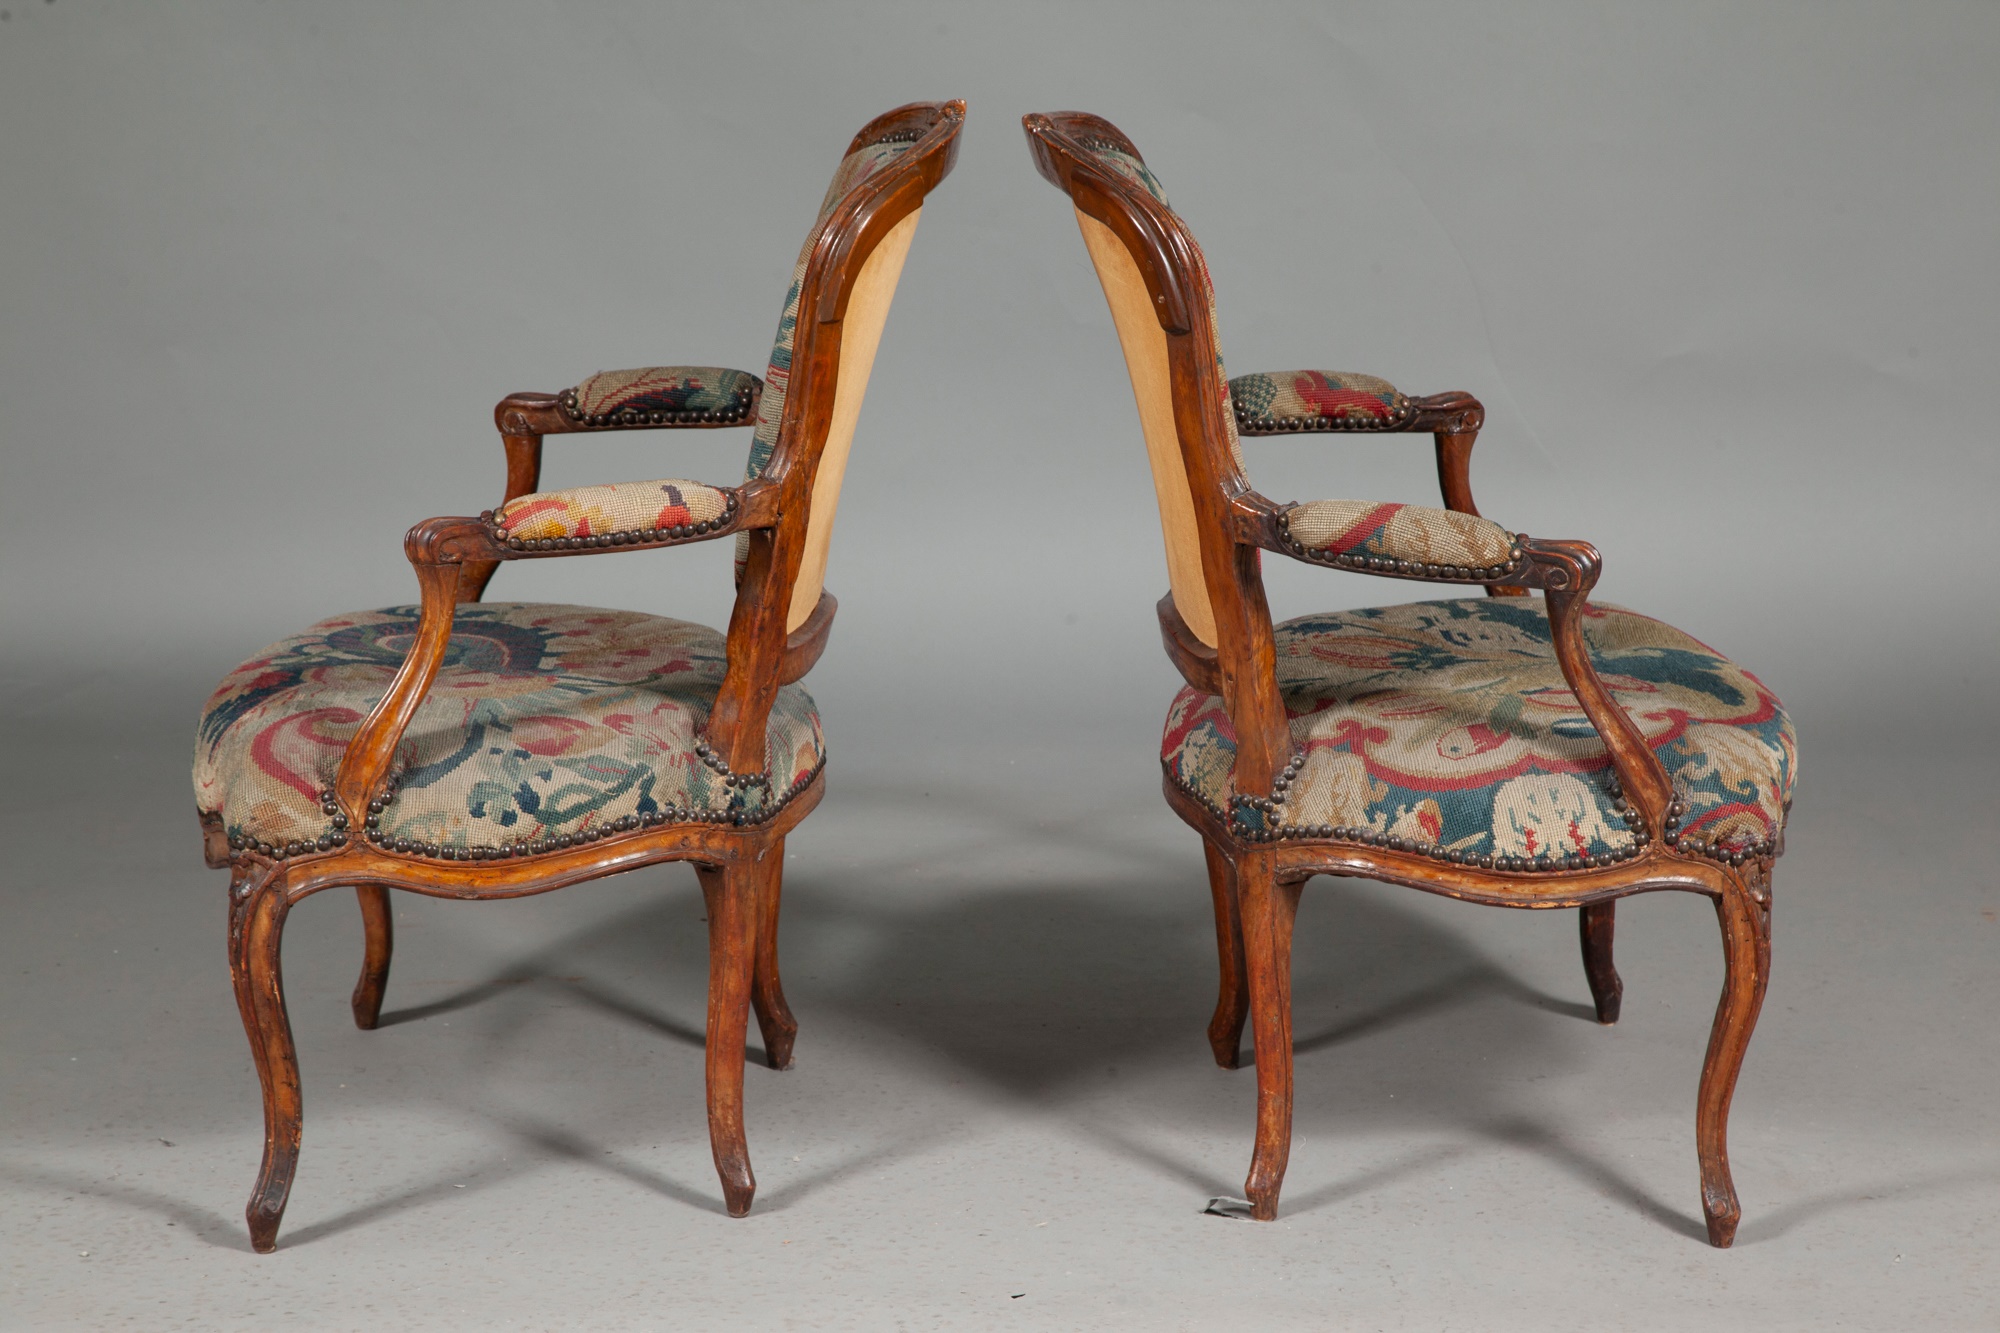 Assembled Group of Louis XV Needlework-Upholstered Beechwood Fauteuils - Image 5 of 8